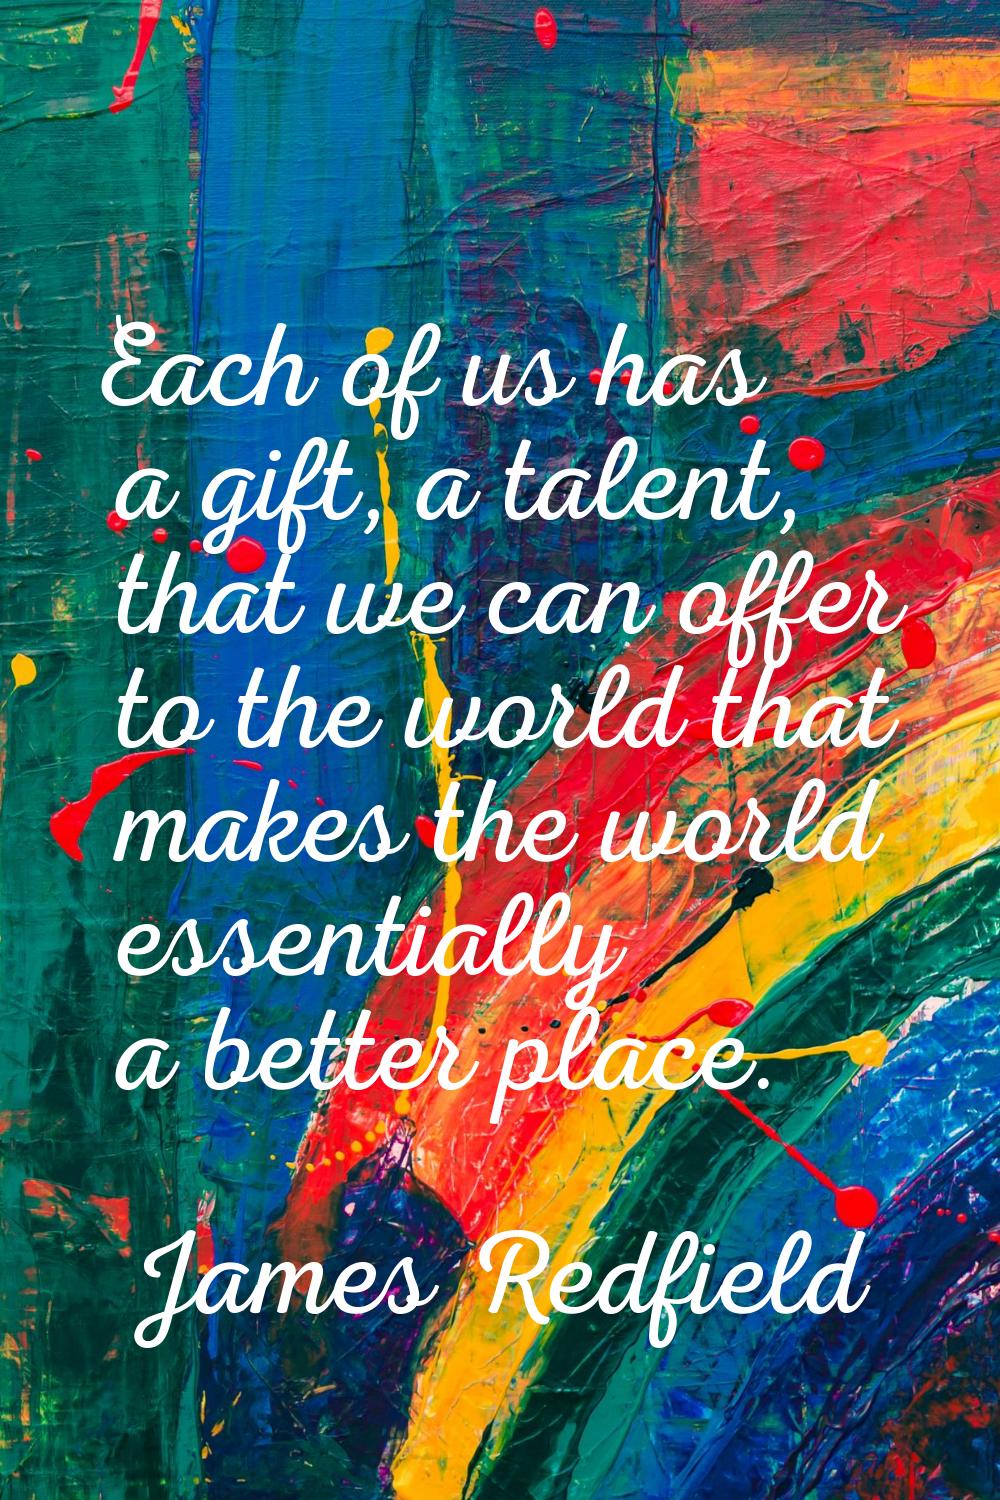 Each of us has a gift, a talent, that we can offer to the world that makes the world essentially a 